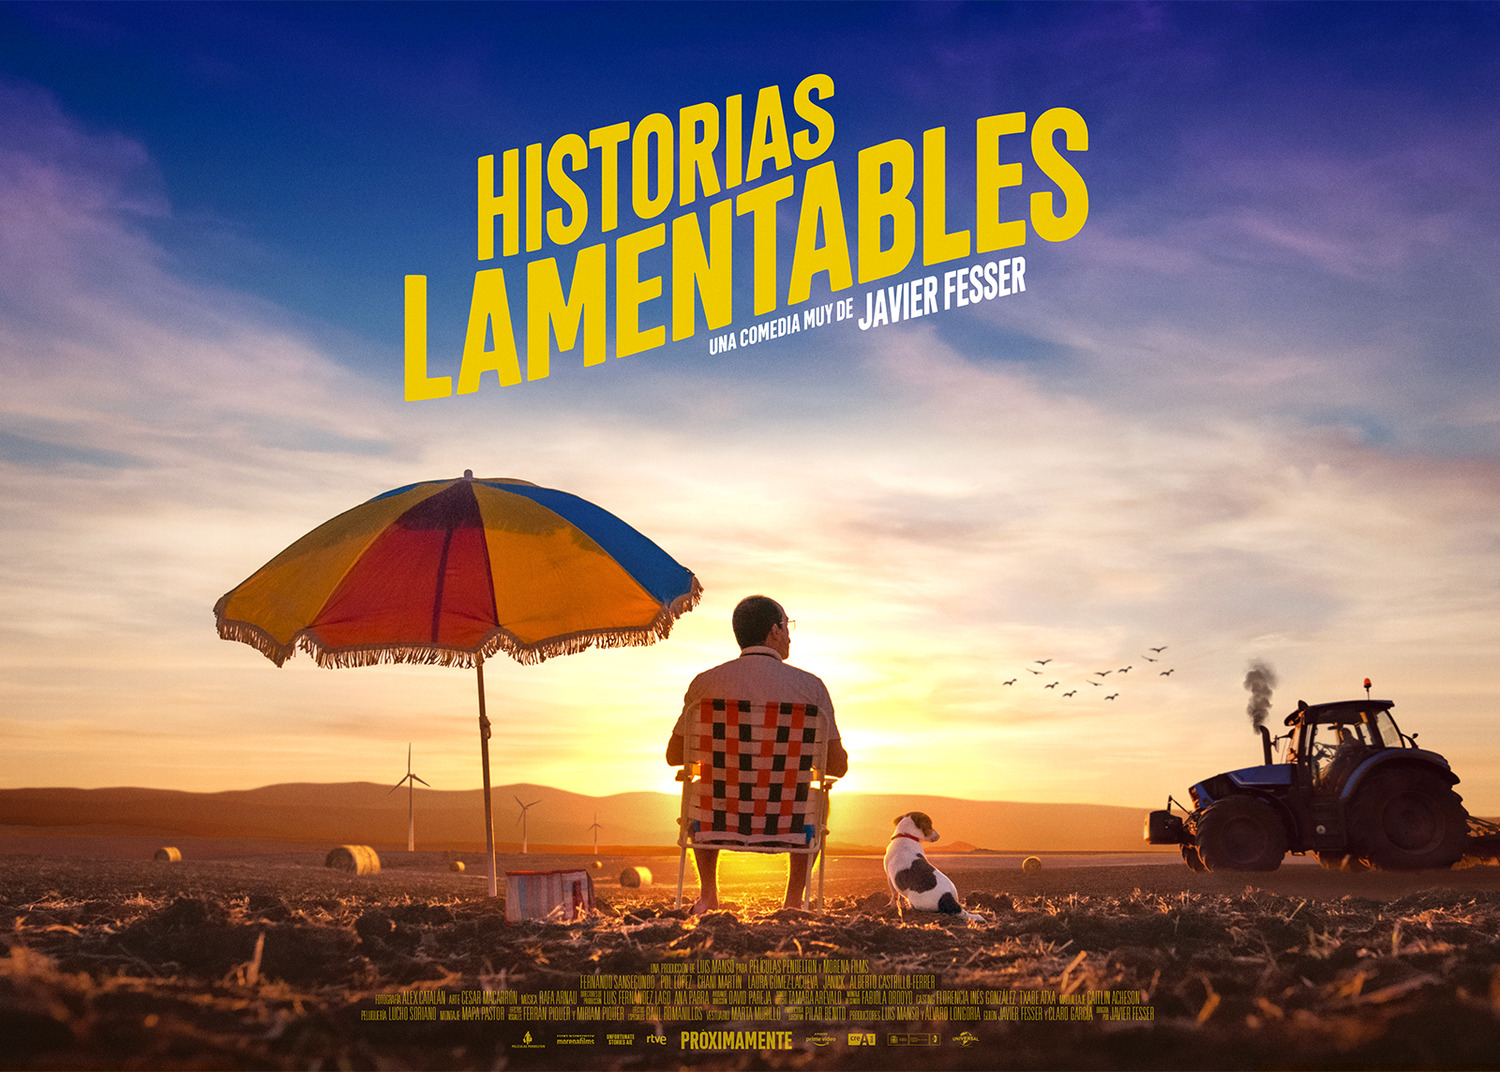 Extra Large TV Poster Image for Historias lamentables (#2 of 2)